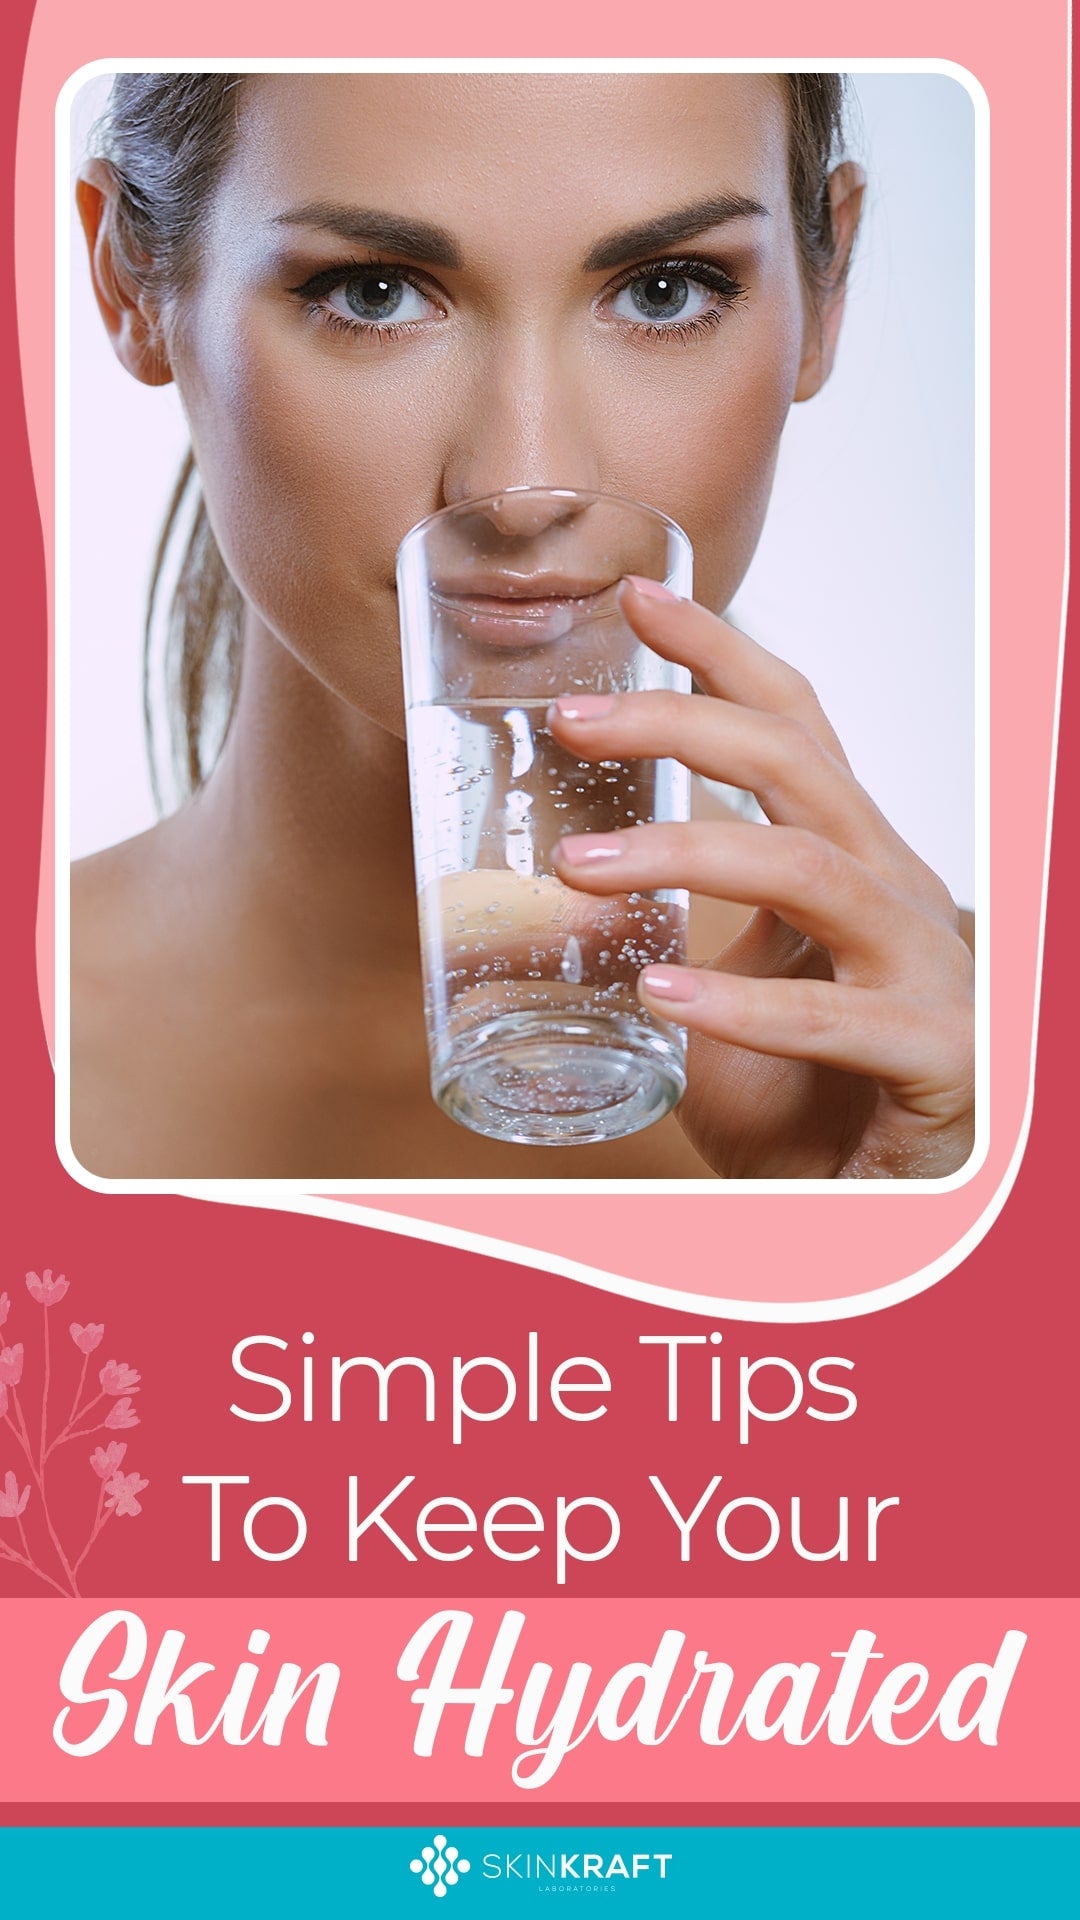 Simple Tips To Keep Your Skin Hydrated 9469